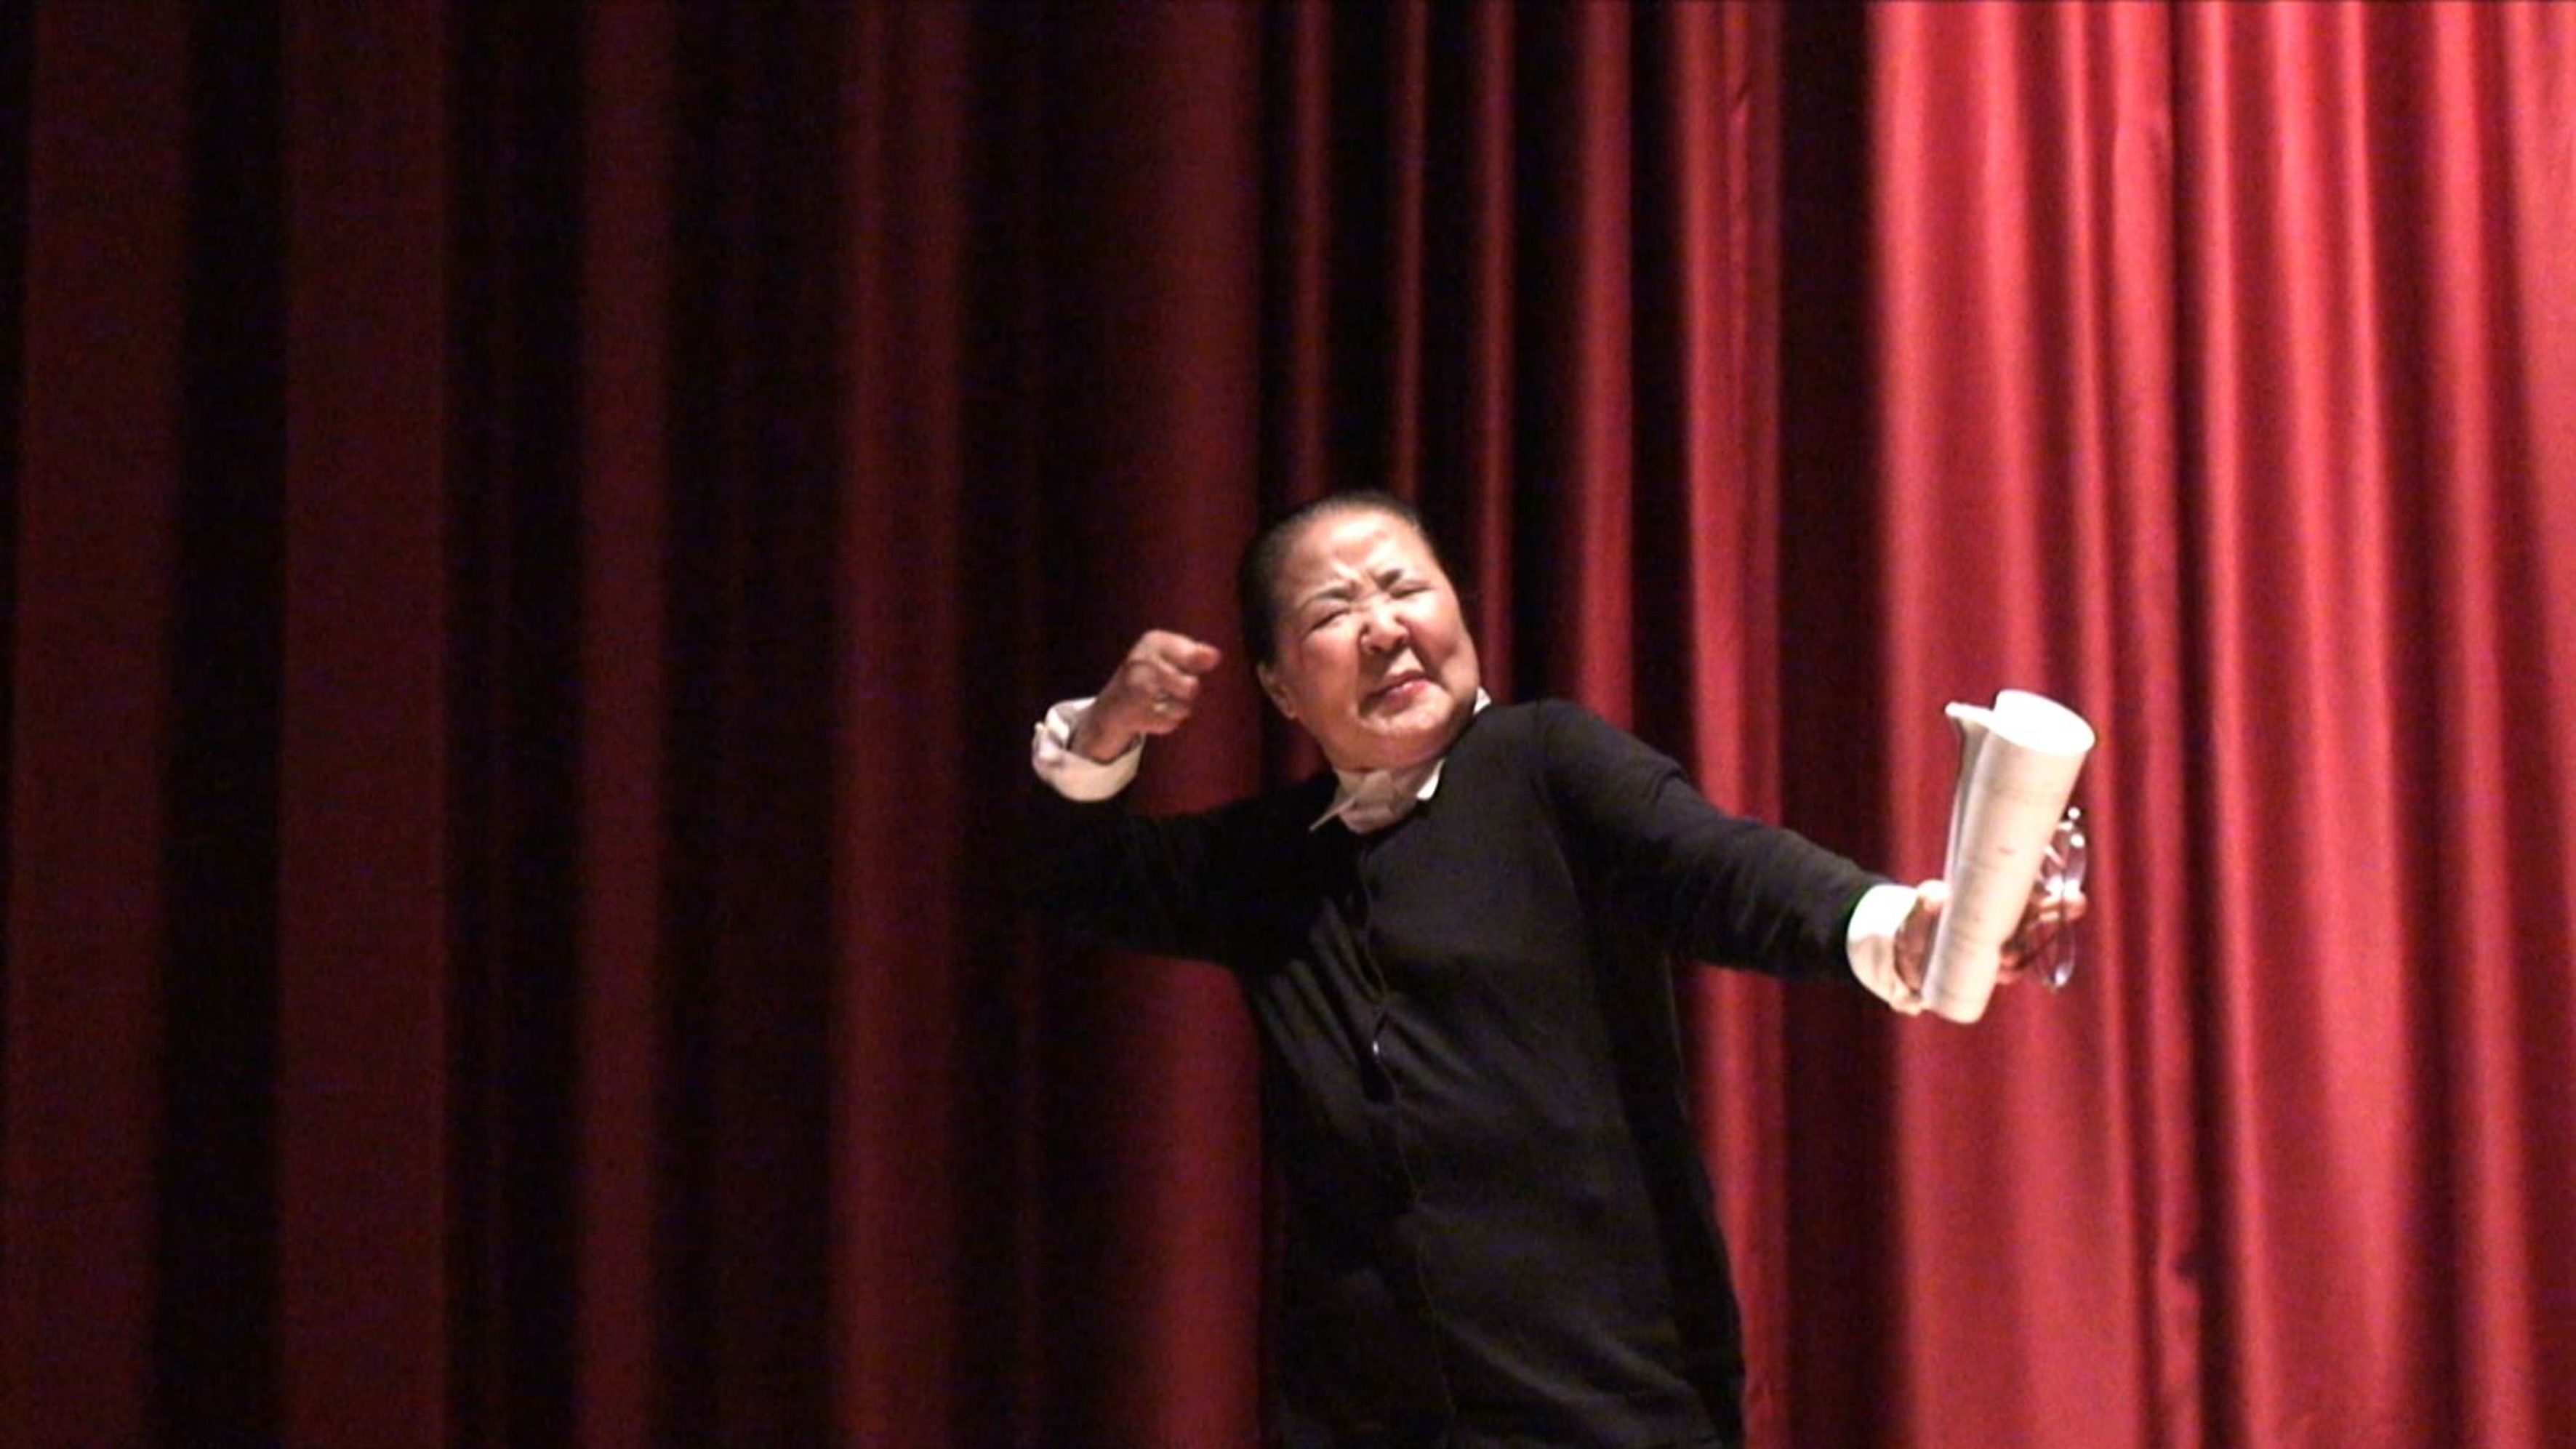 A still from a 10:14 video of an East Asian woman on a stage giving directing notes in Korean in front of a red curtain backdrop.